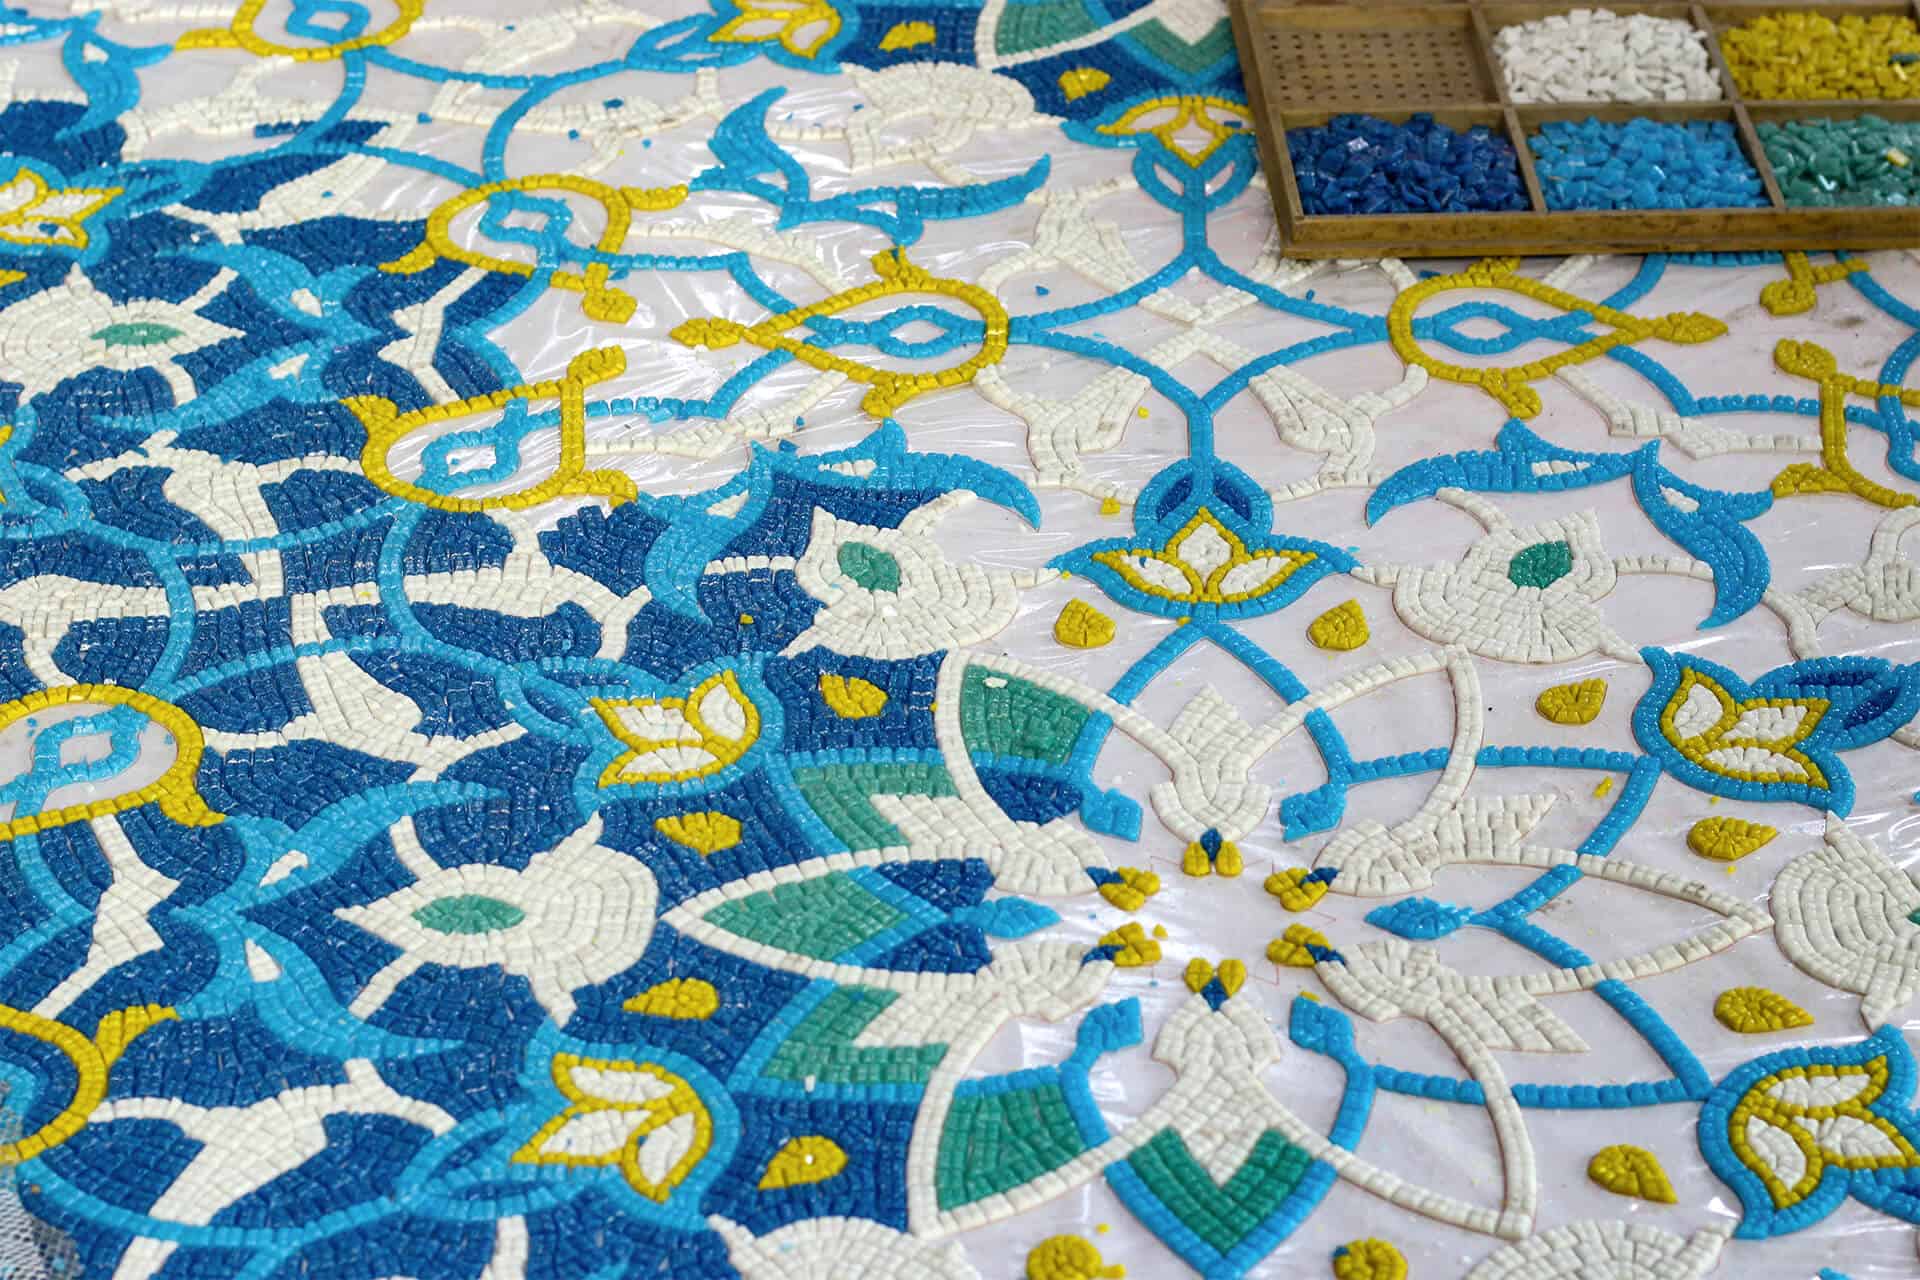 behind-the-scenes photos from the MEC workshop showing a WIP Moroccan mosaic tile being made with colorful 10mm Vertex glass tiles